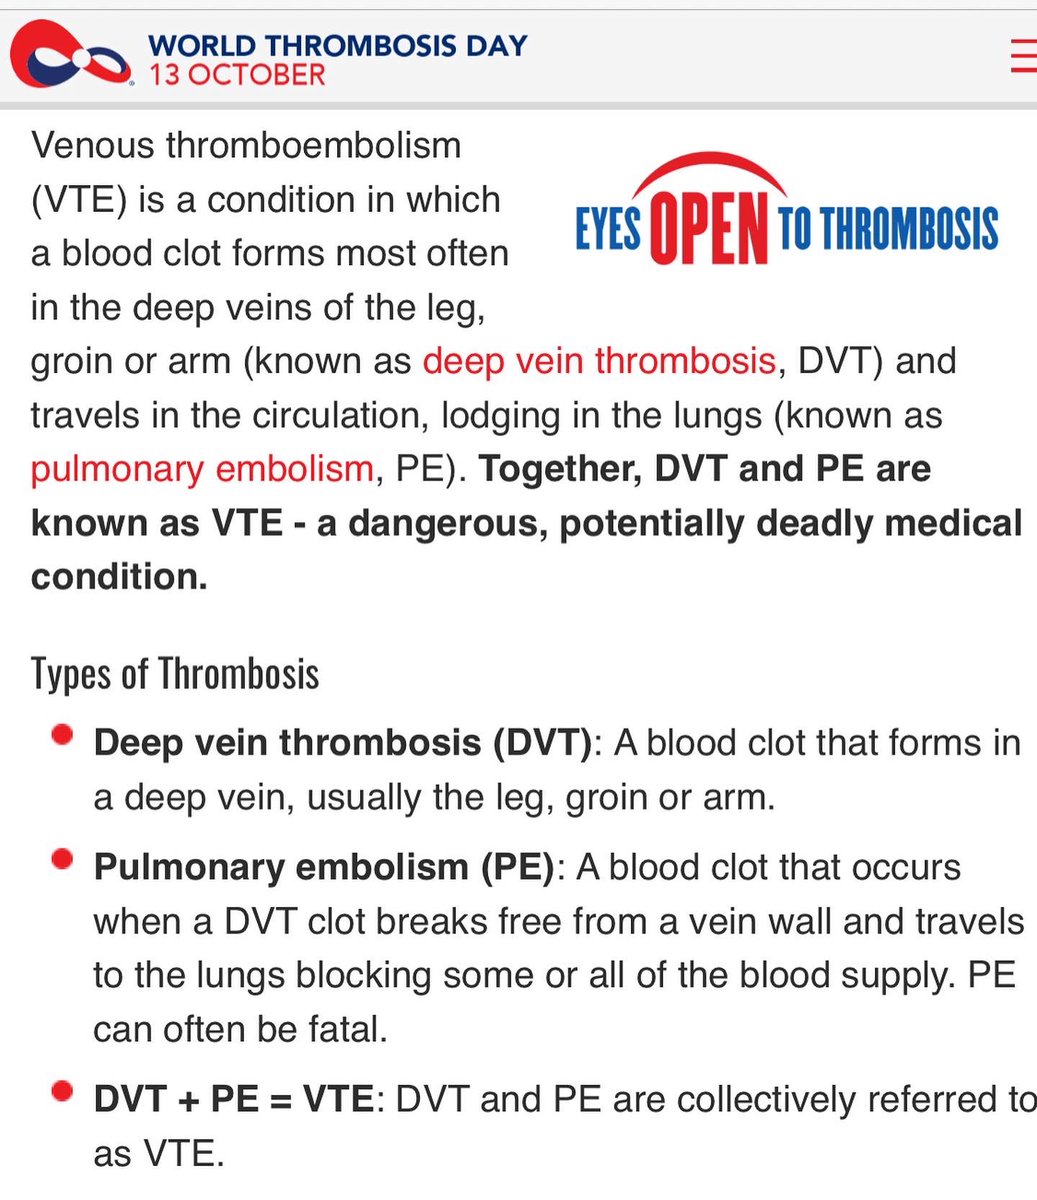 Today is #WorldThrombosisDay. VTE can be life-threatening or organ-threatening & leads to around 100K-300K deaths in the US alone annually. #BloodClots are treatable but most people may not recognize the signs and symptoms. Here are some helpful facts from @thrombosisday